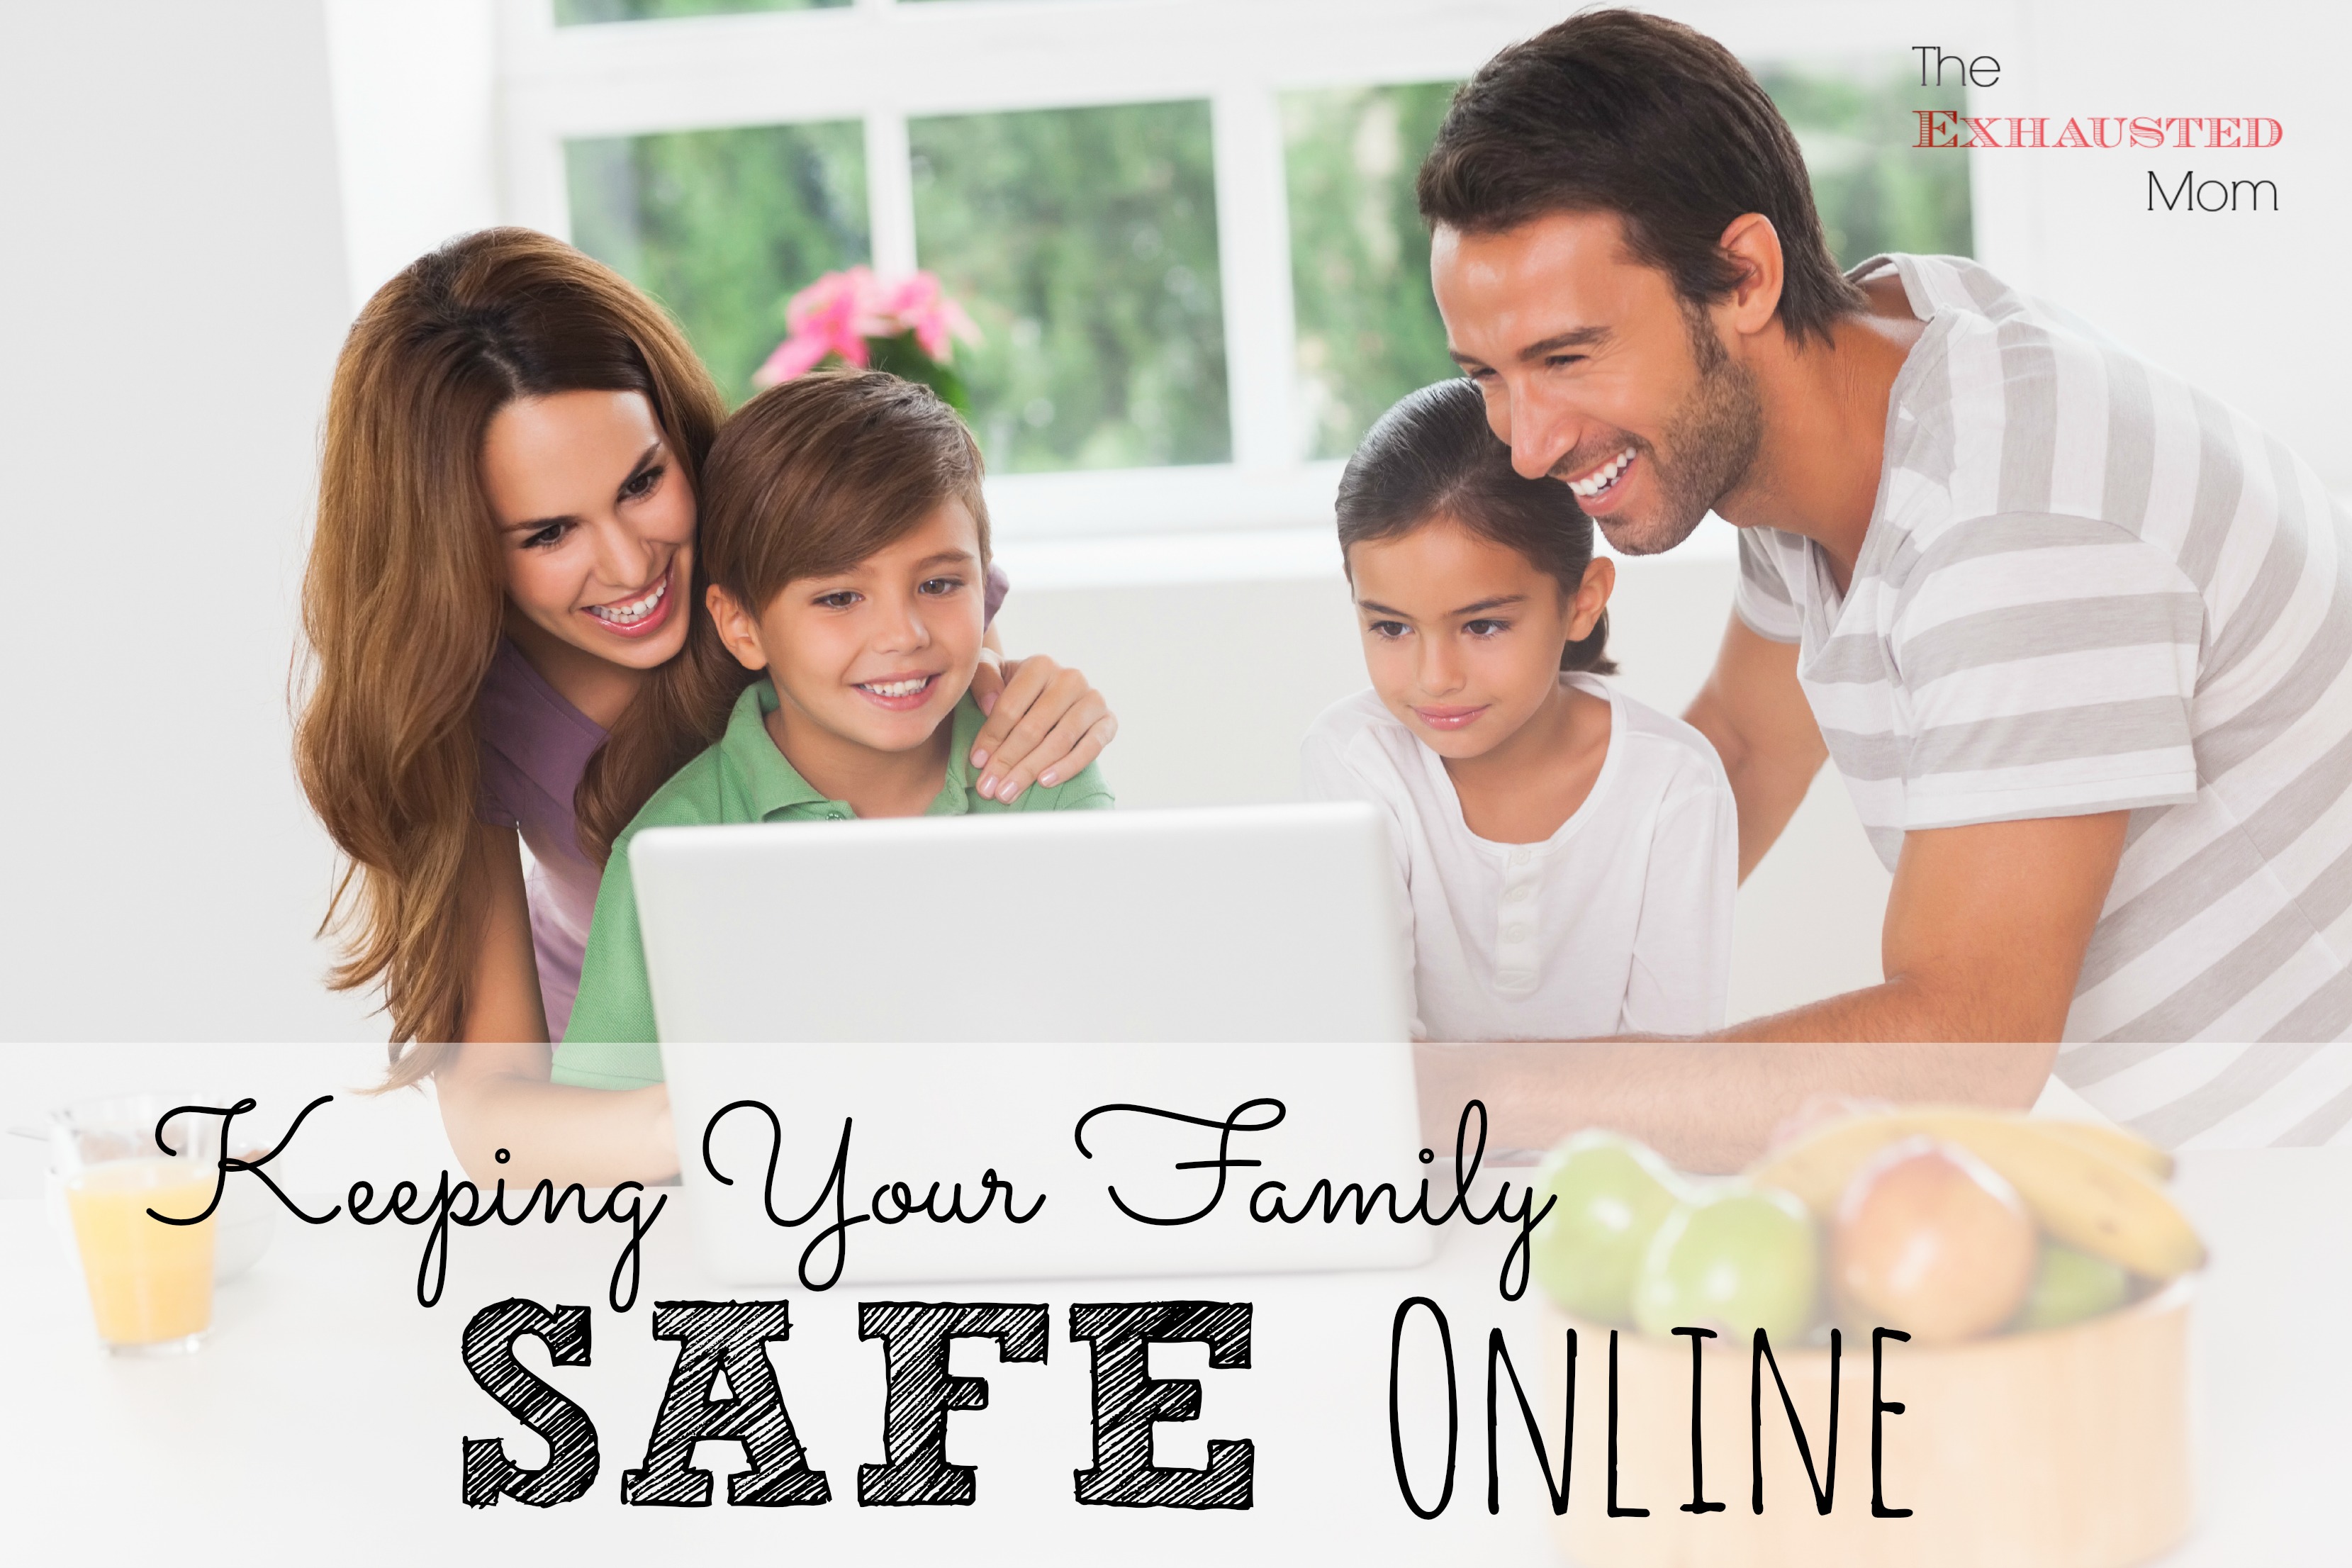 Worry No More! Secrets for Your Family Online Safety